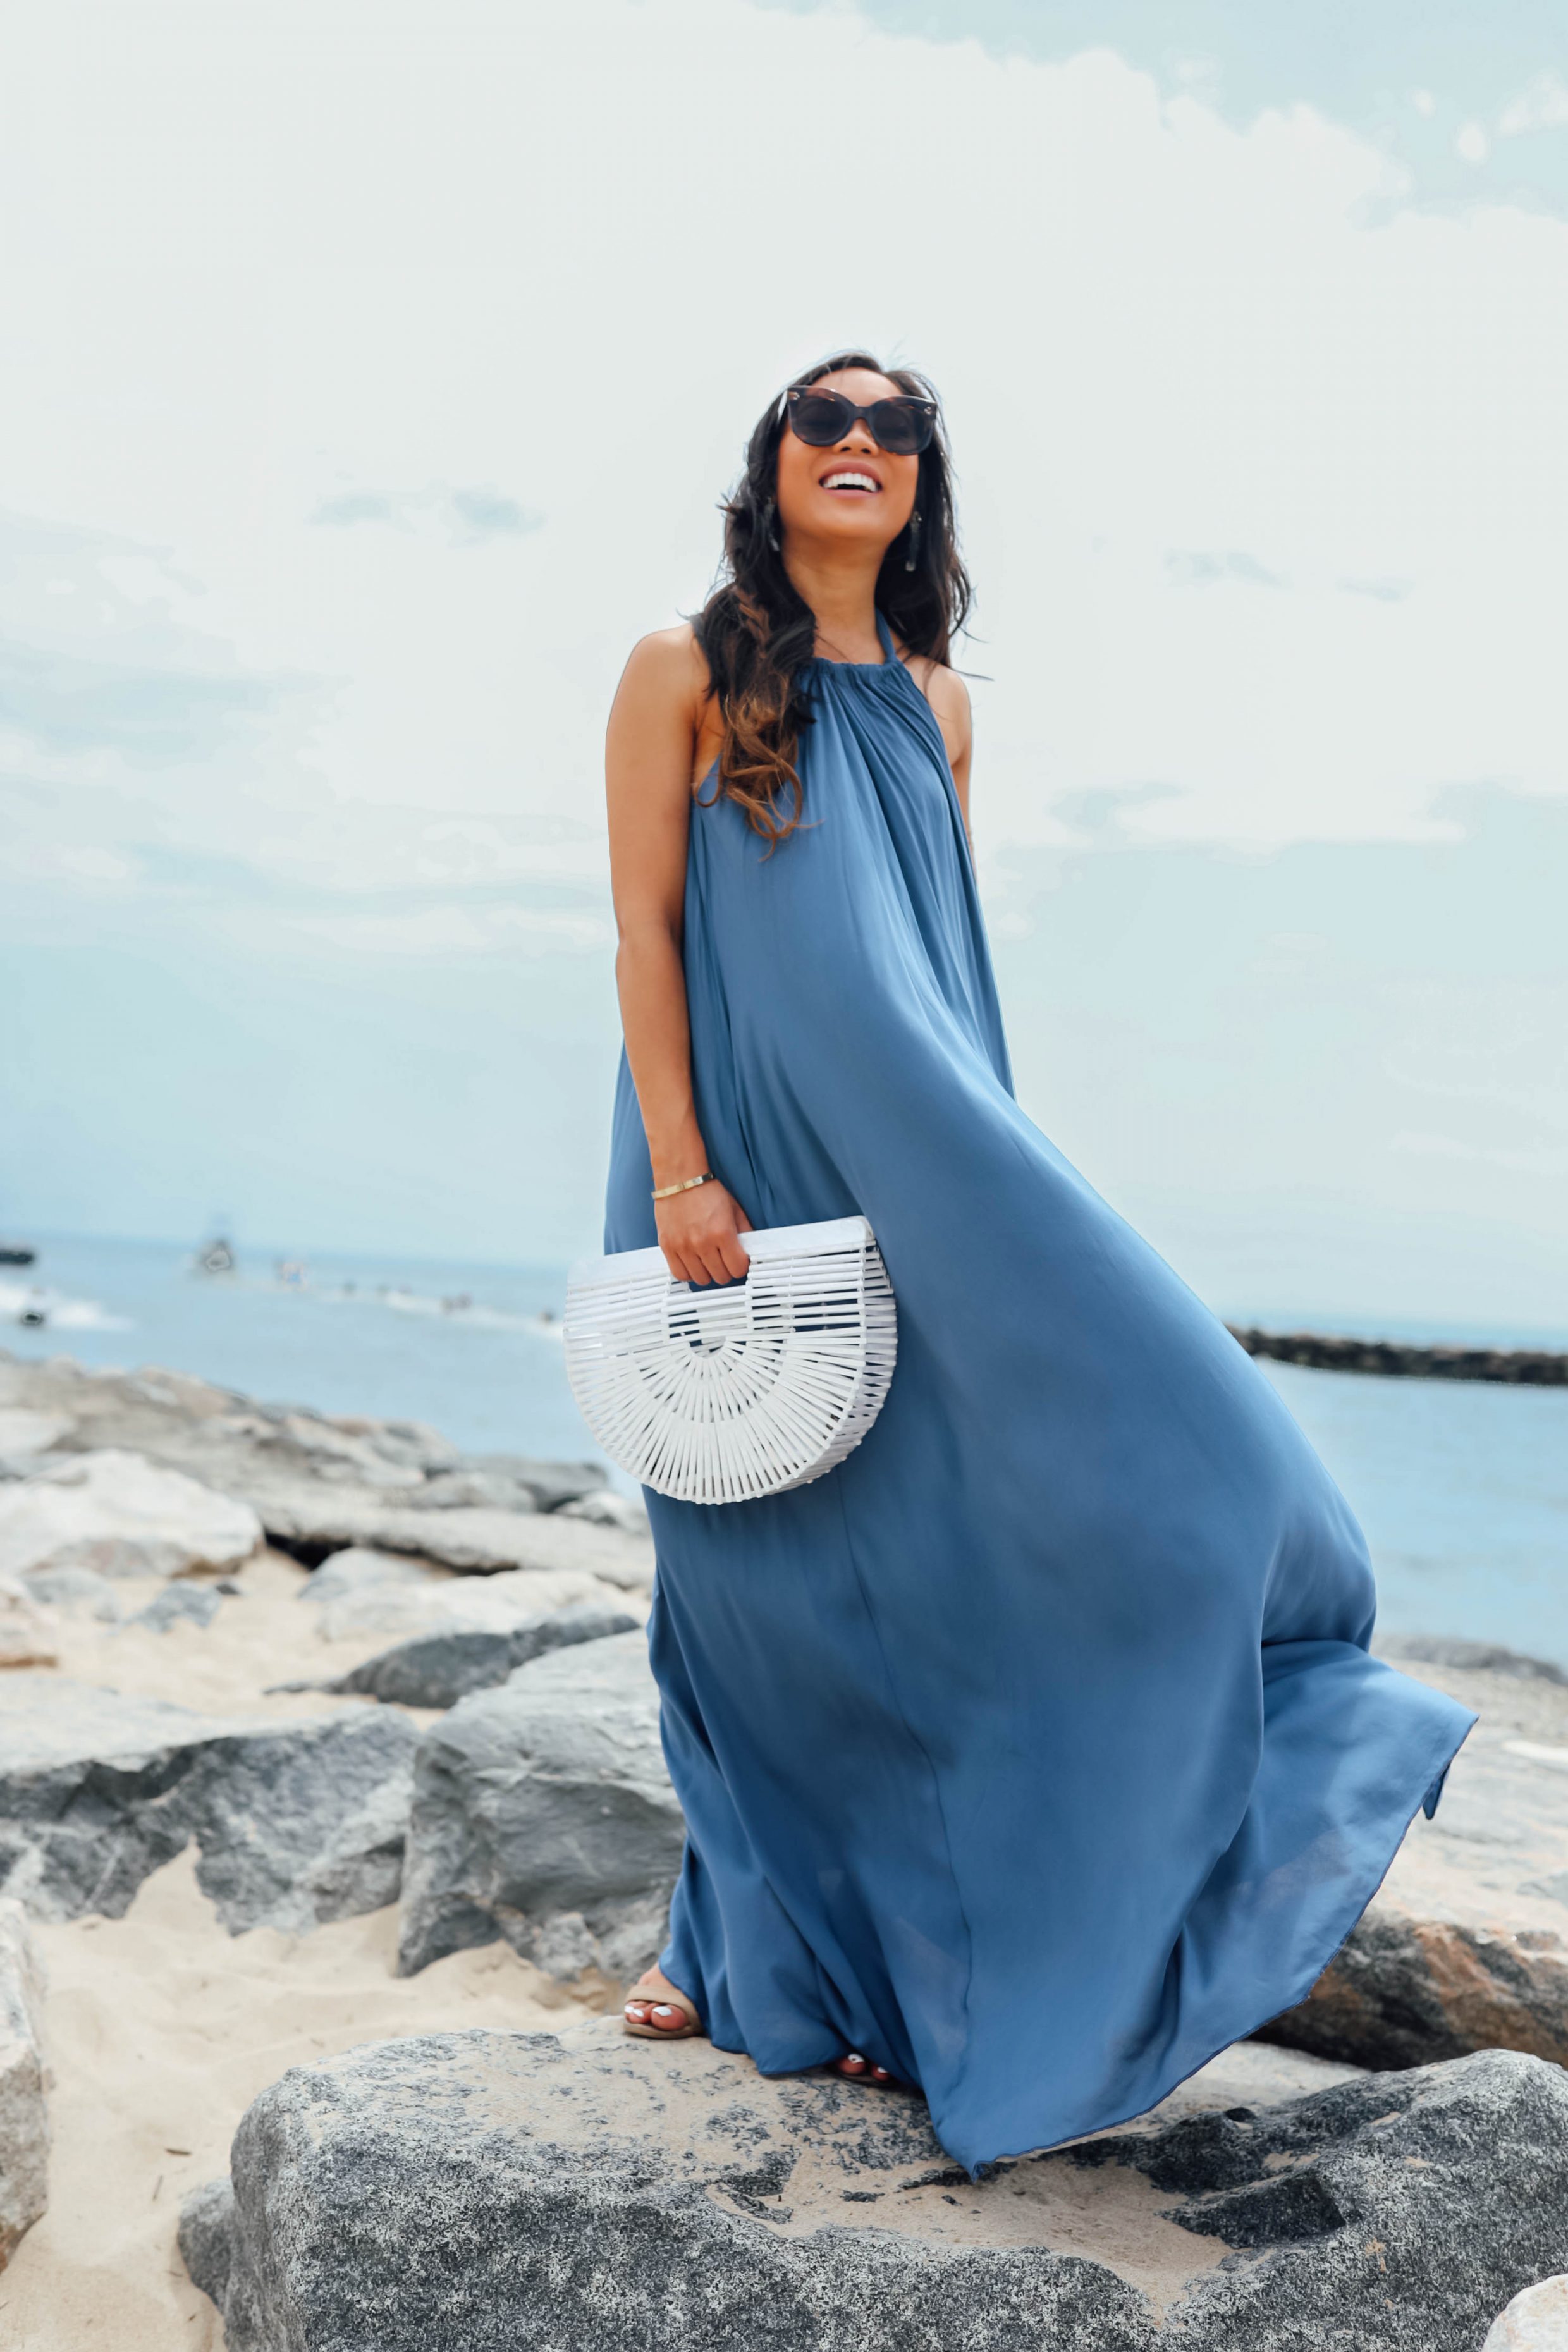 Hoang-Kim of Color & Chic wears an indigo maxi dress with pockets